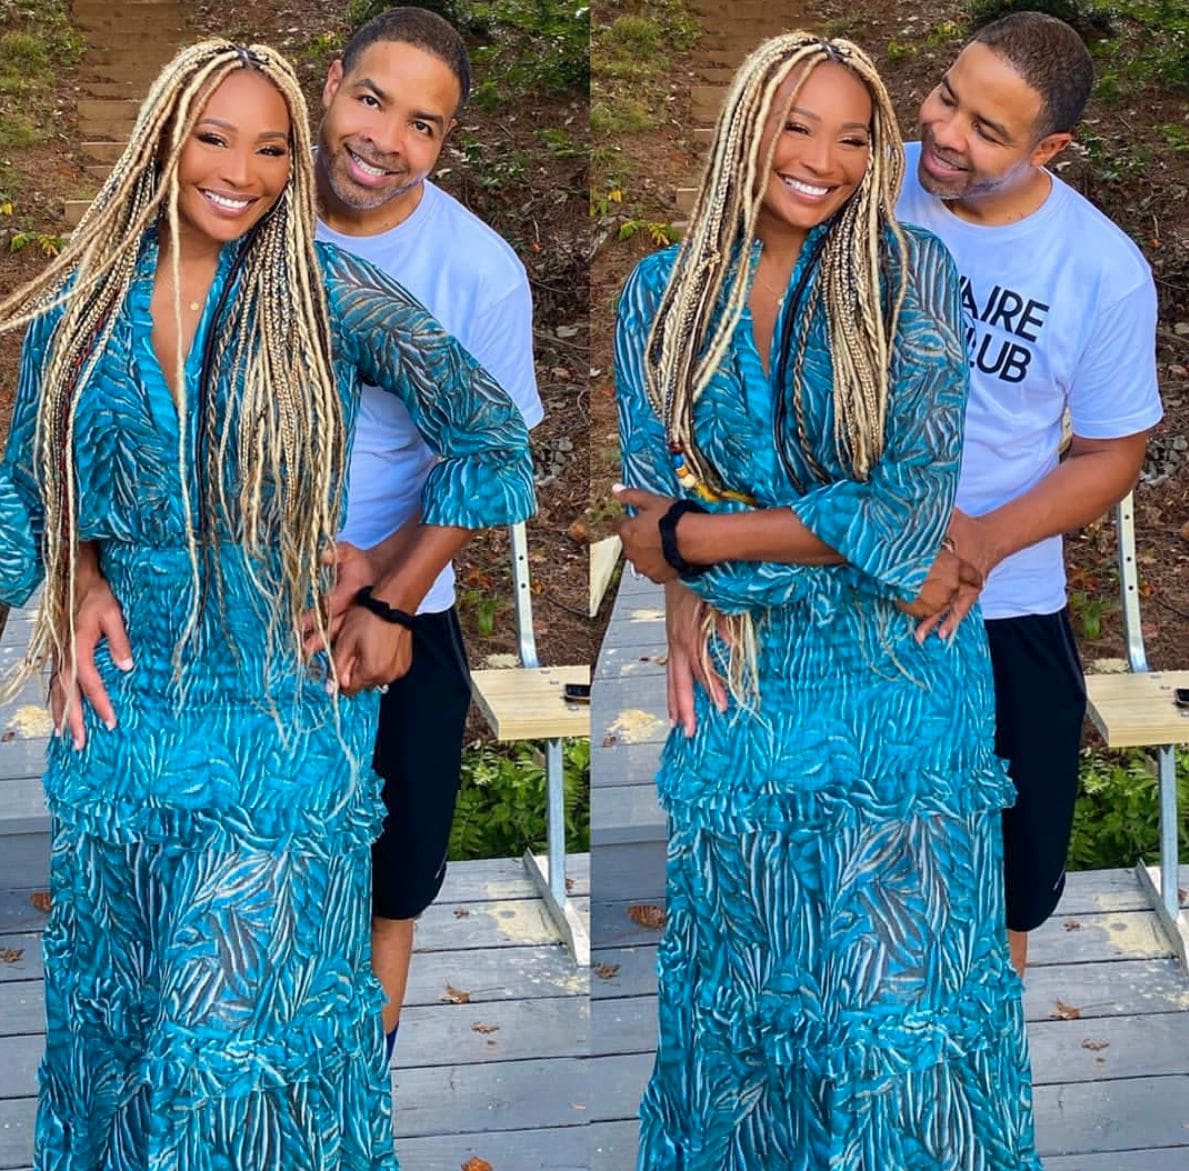 Cynthia Bailey Gushes Over Mike Hill - Check Out The Photo She Shared